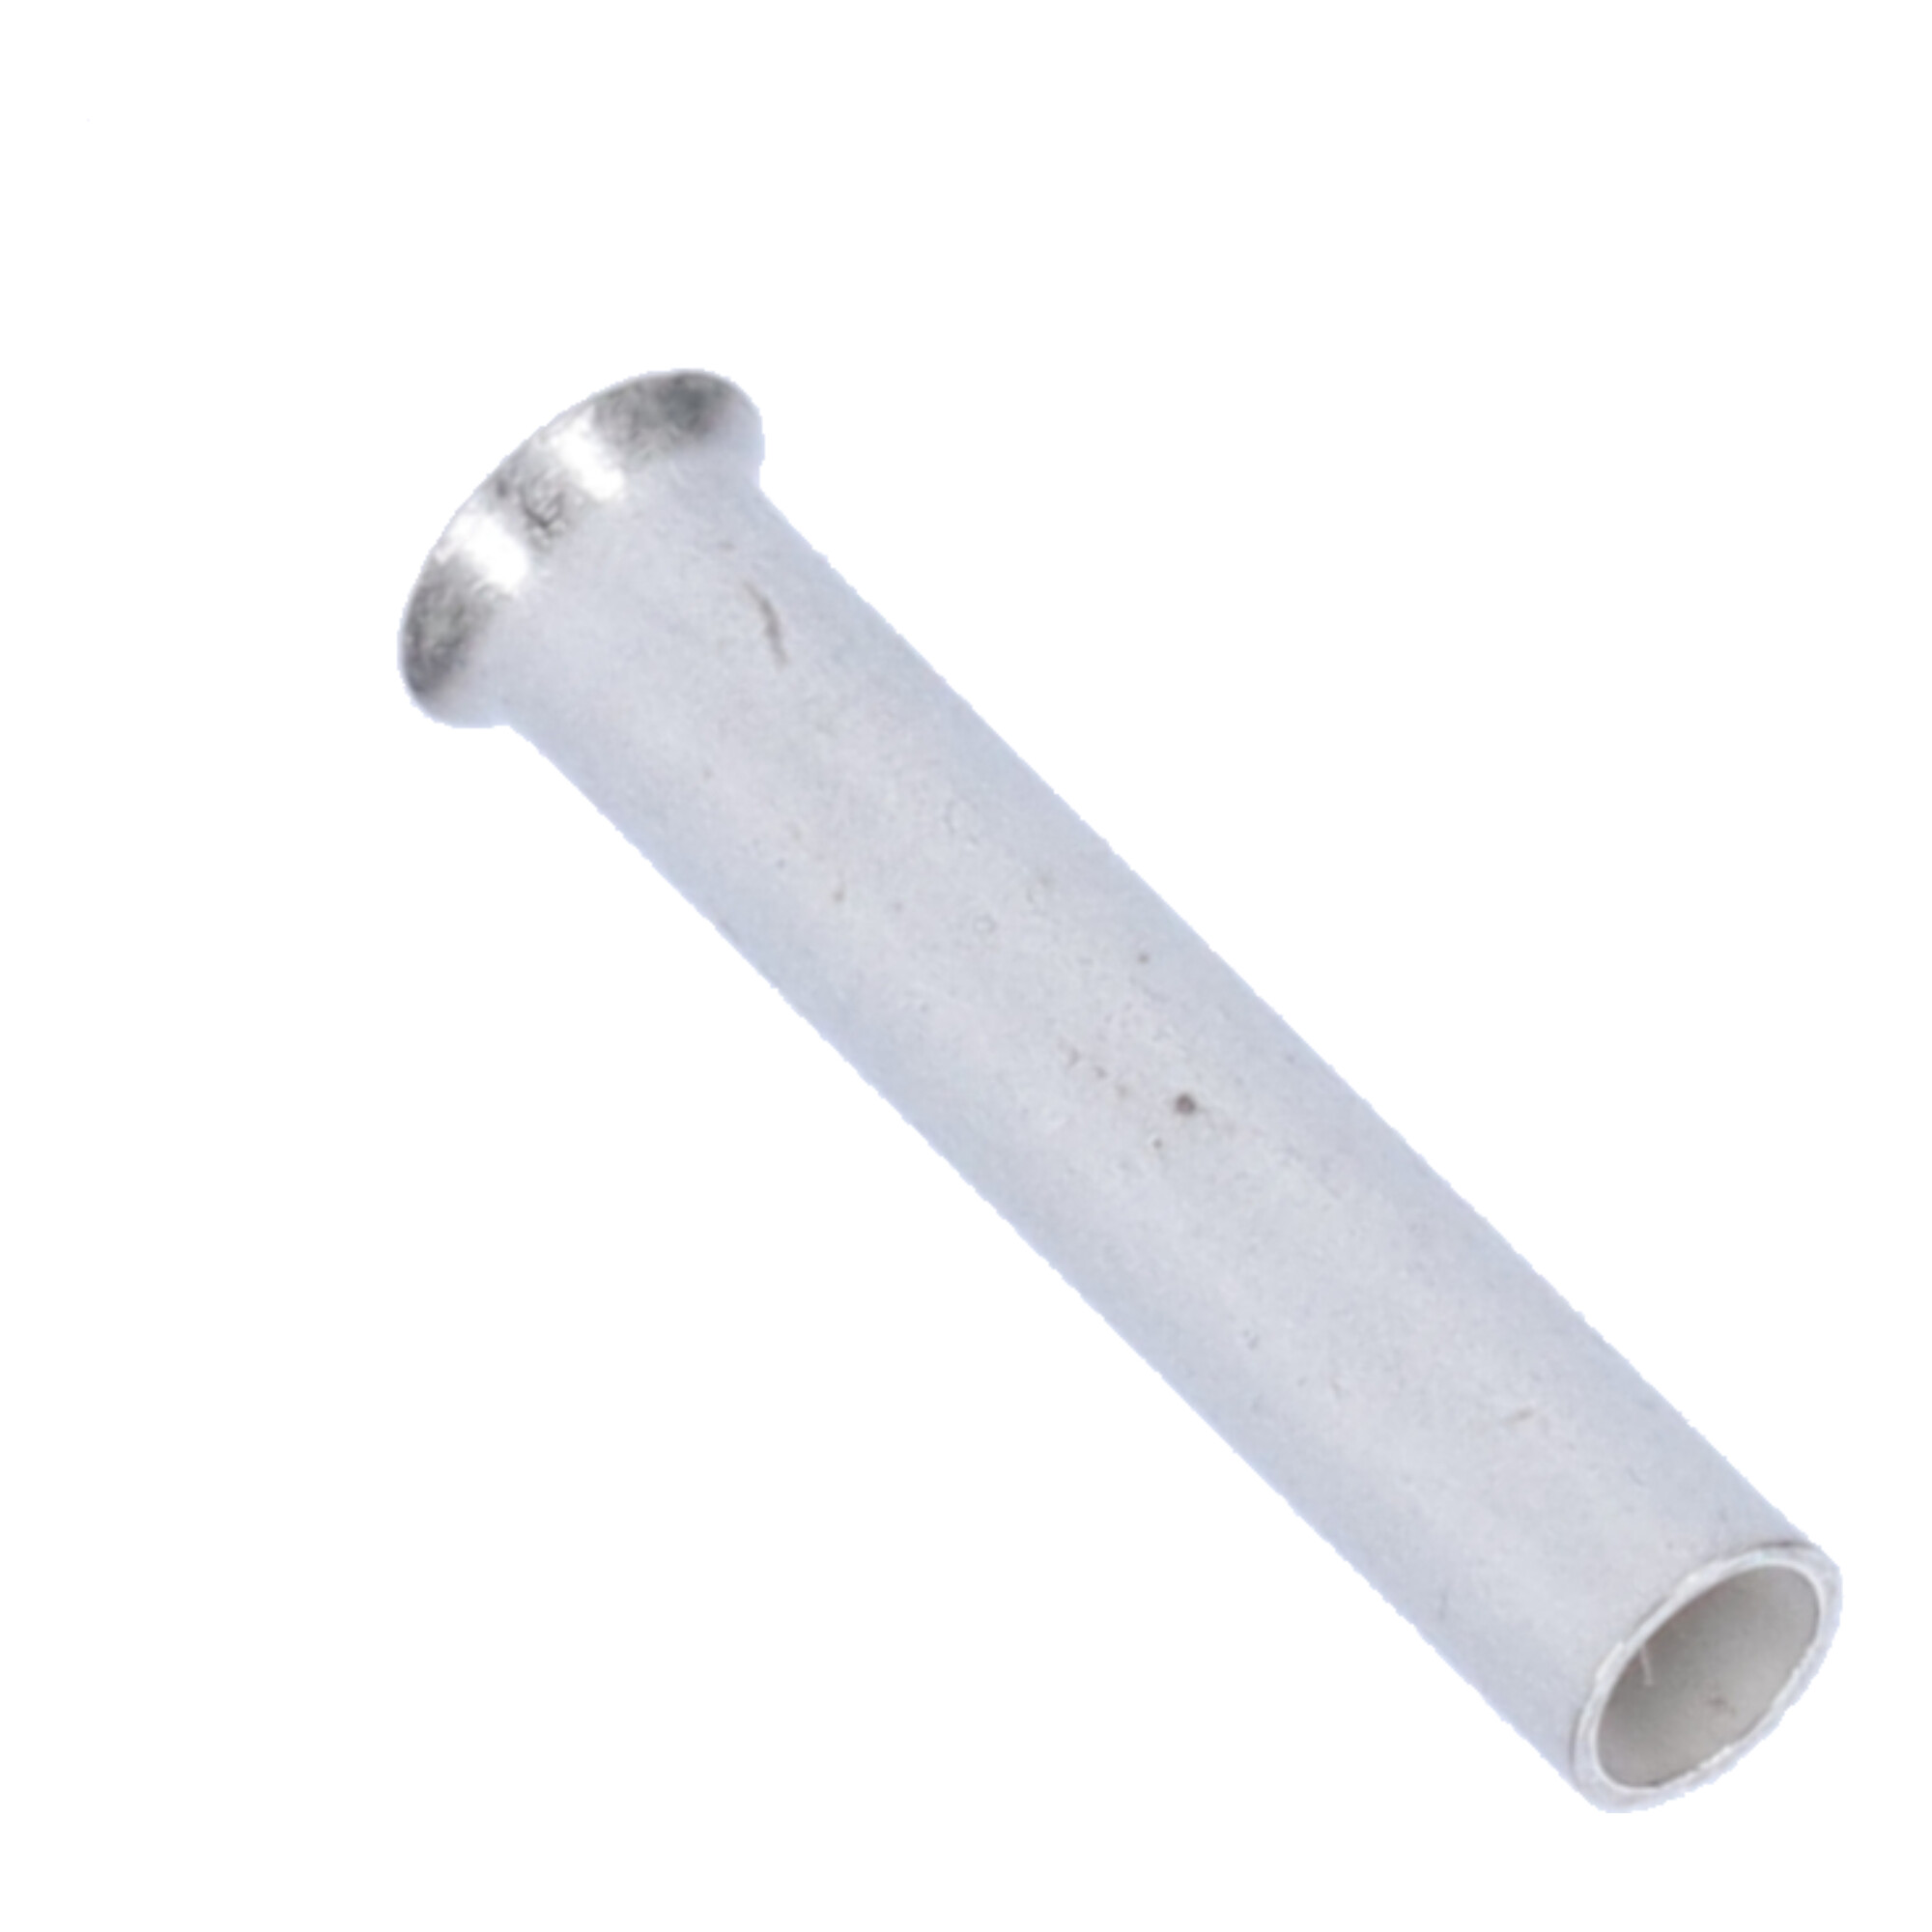 15-B01006 Uninsulated wire end sleeve